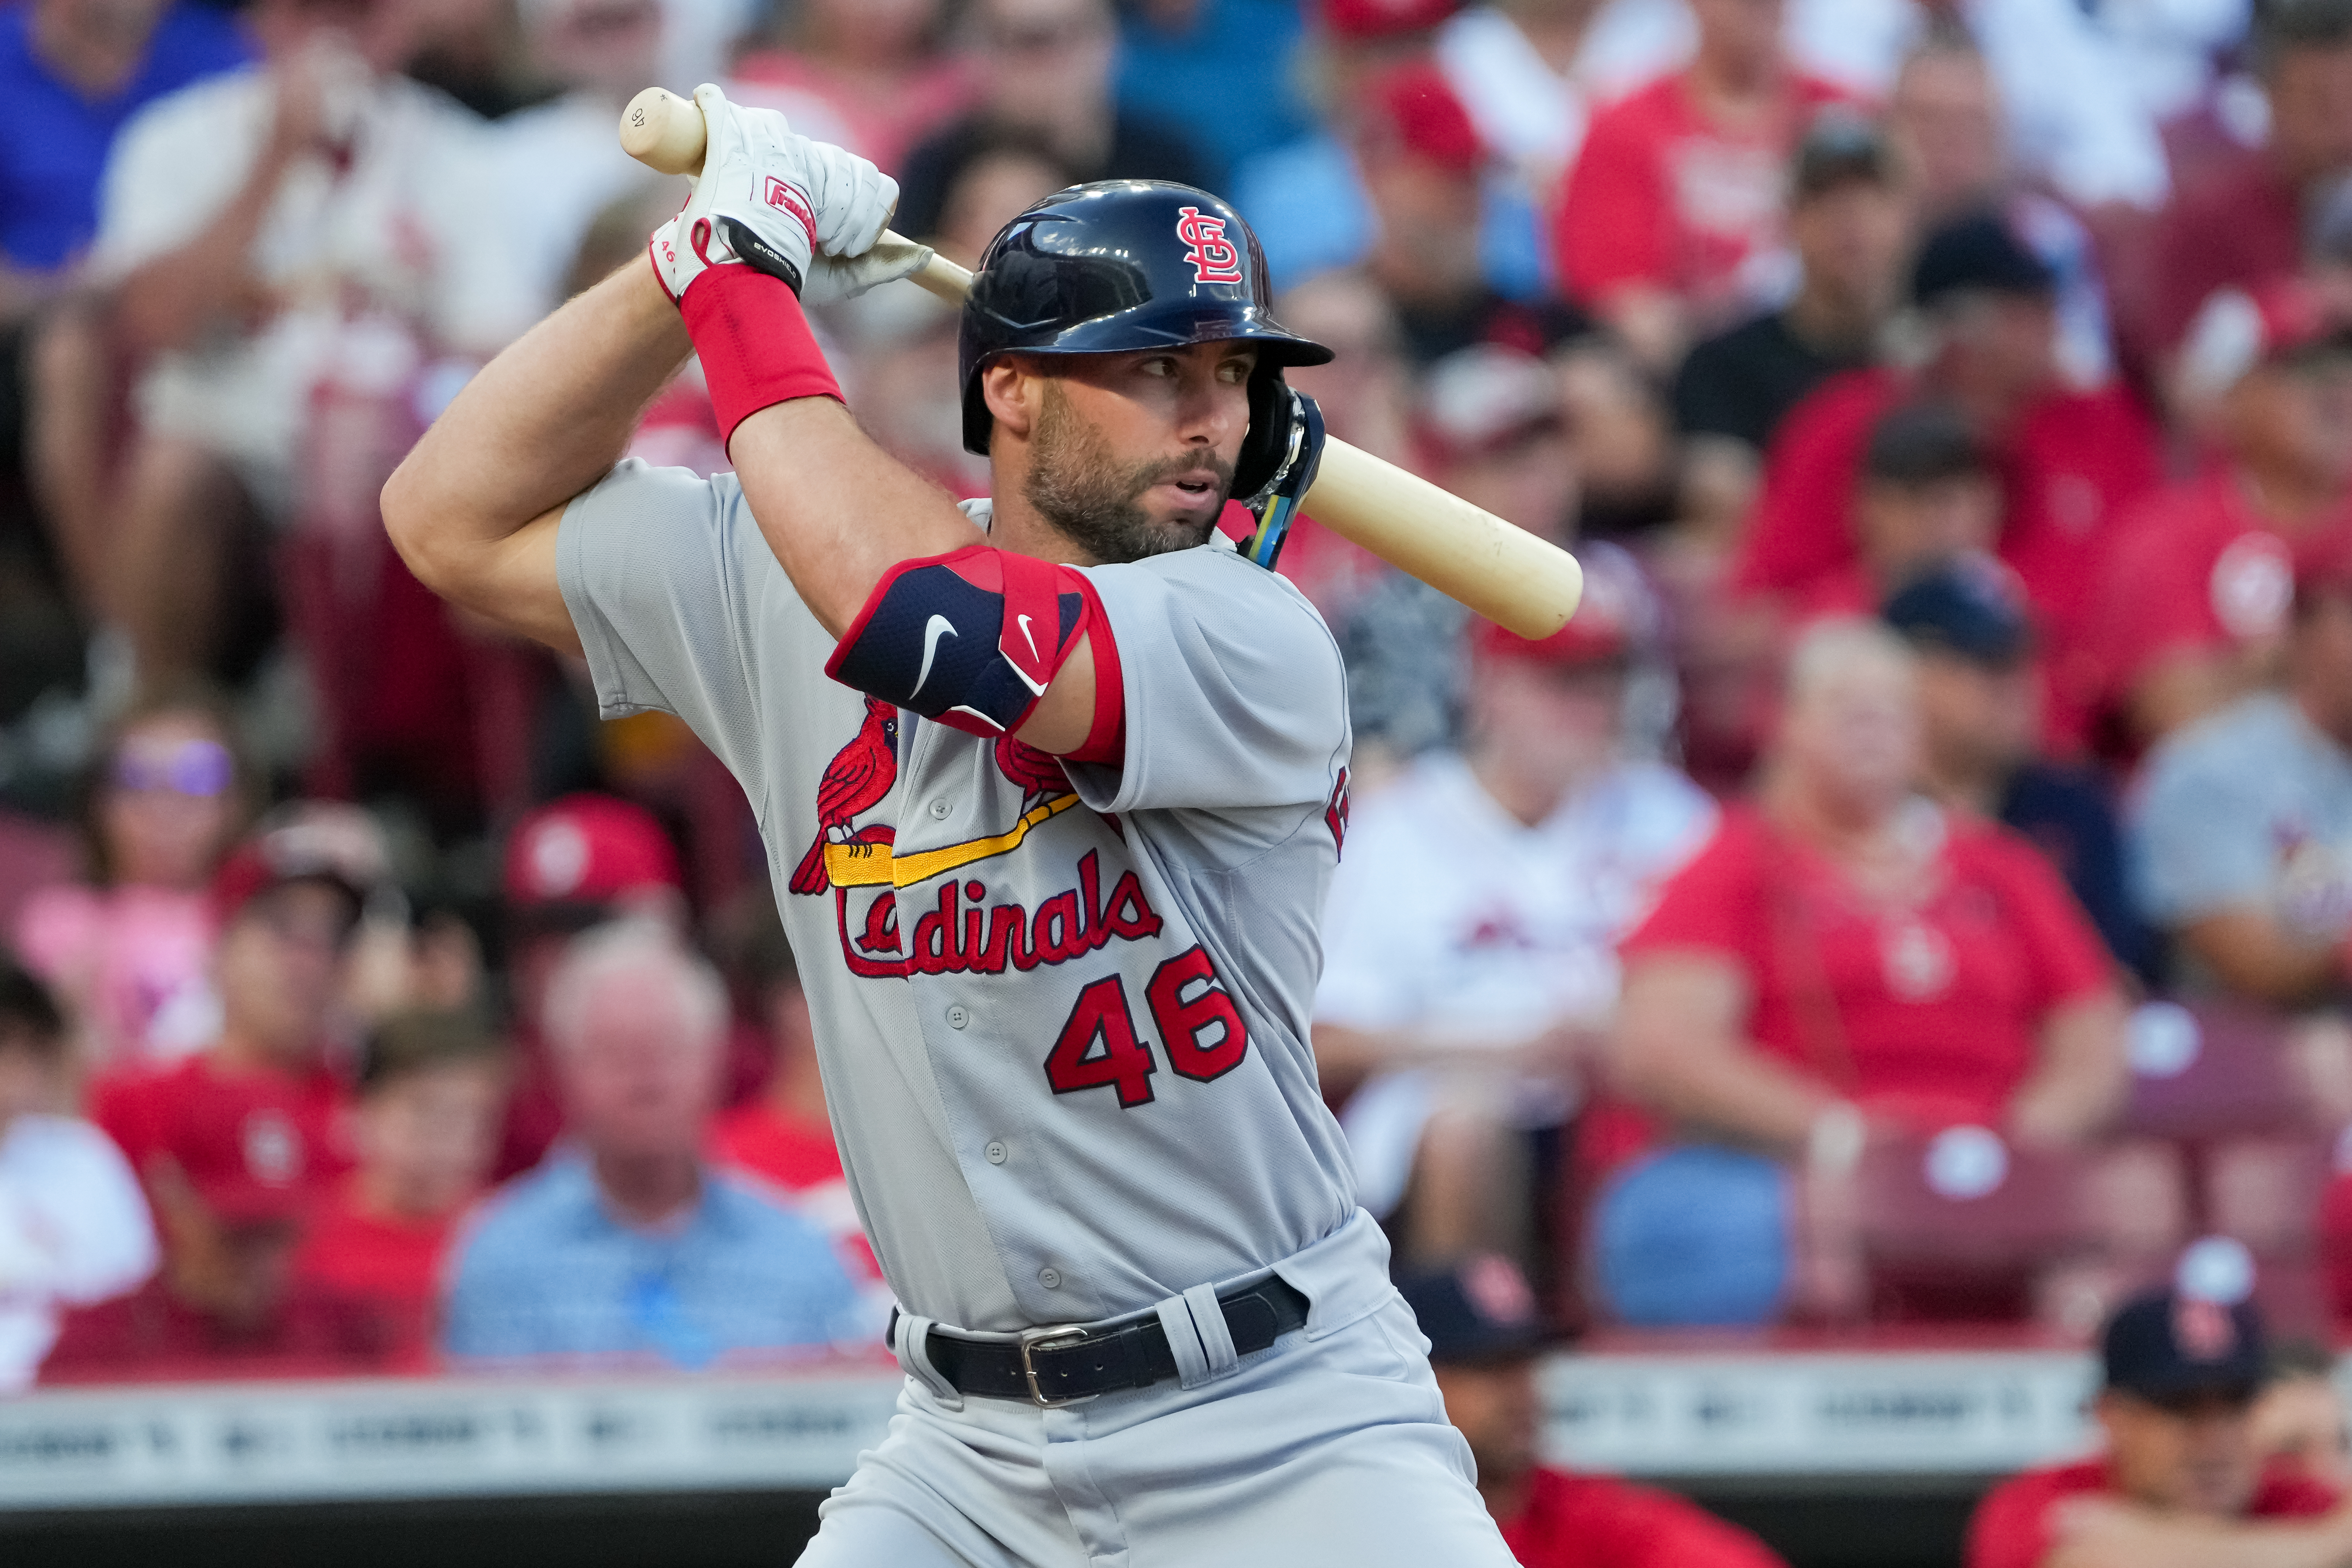 Paul Goldschmidt of the St. Louis Cardinals hits during the first inning in the game against the Cincinnati Reds at Great American Ball Park in Cincinnati, Ohio, August 31, 2022. /CFP 